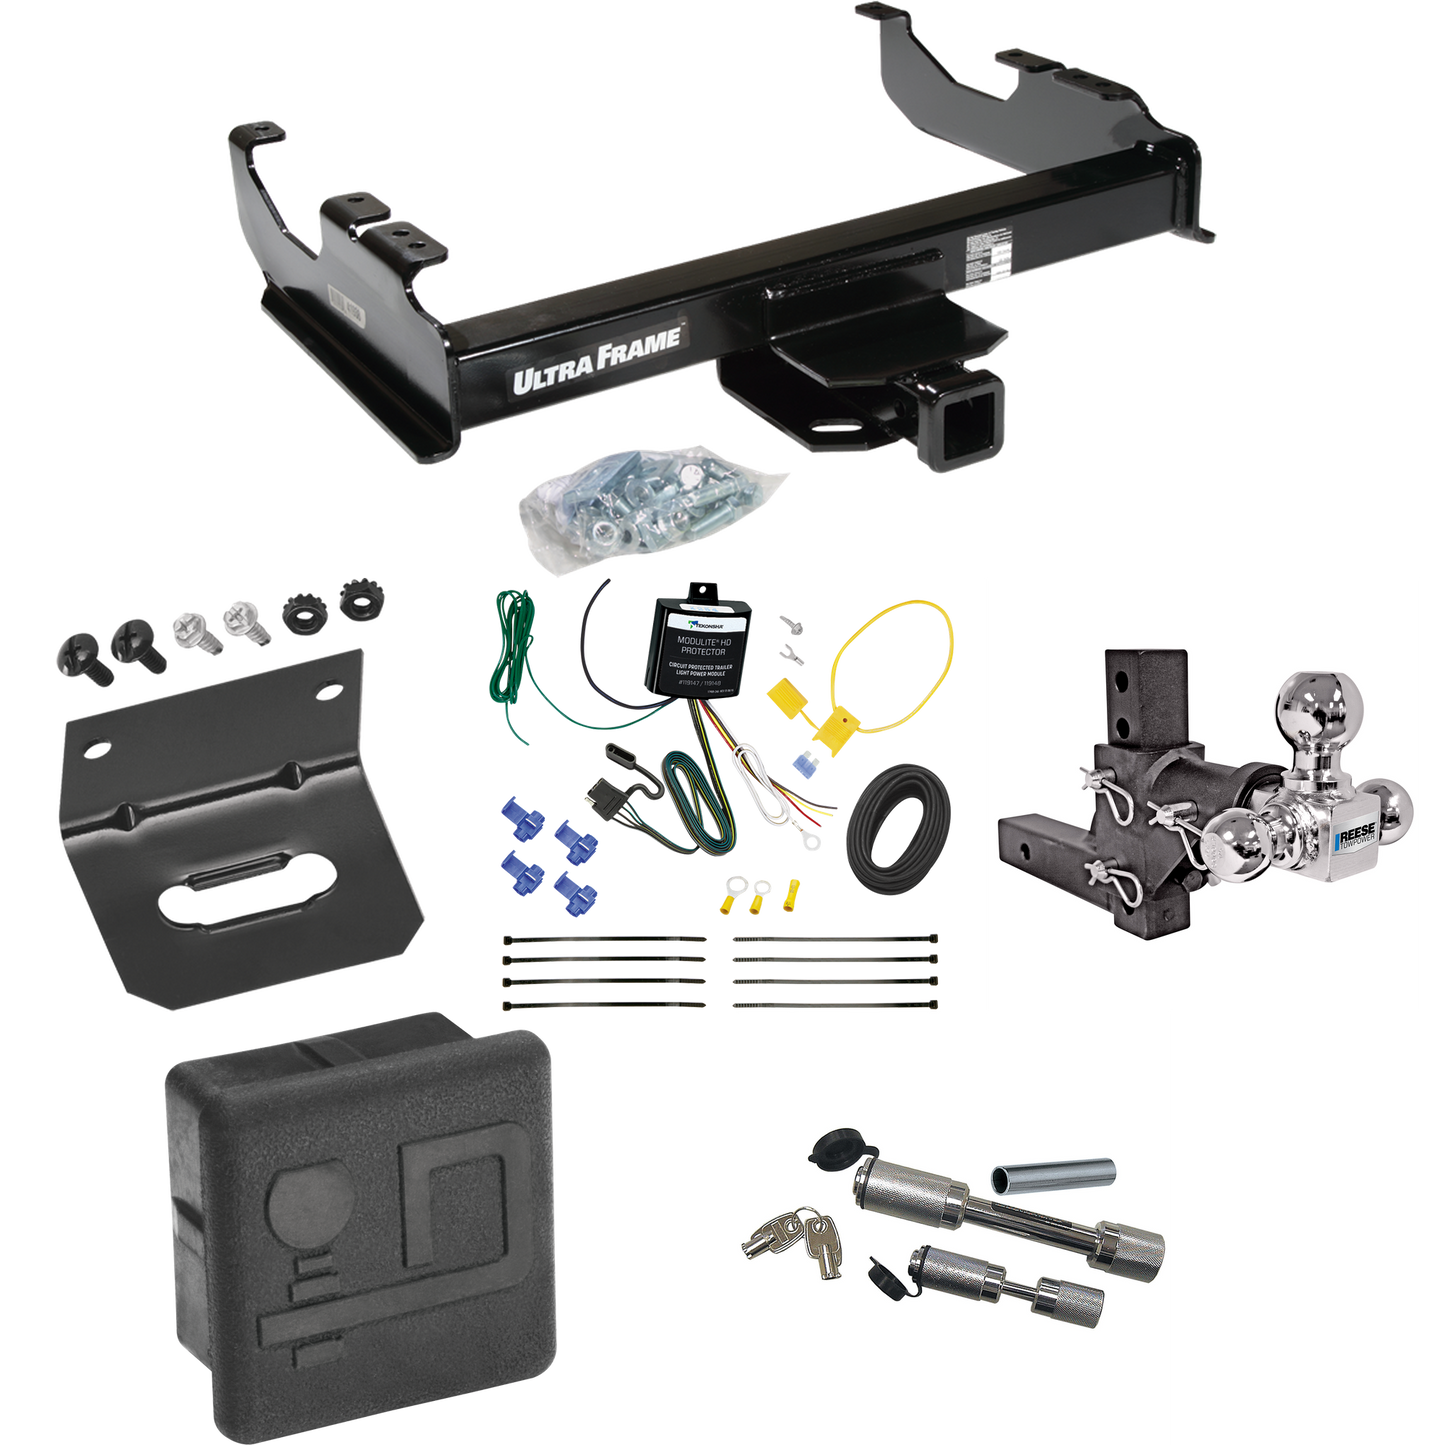 Fits 2007-2023 GMC Sierra 3500 HD Trailer Hitch Tow PKG w/ 4-Flat Wiring Harness + Adjustable Drop Rise Triple Ball Ball Mount 1-7/8" & 2" & 2-5/16" Trailer Balls + Dual Hitch & Coupler Locks + Hitch Cover + Wiring Bracket (For Cab & Chassis, w/34" W